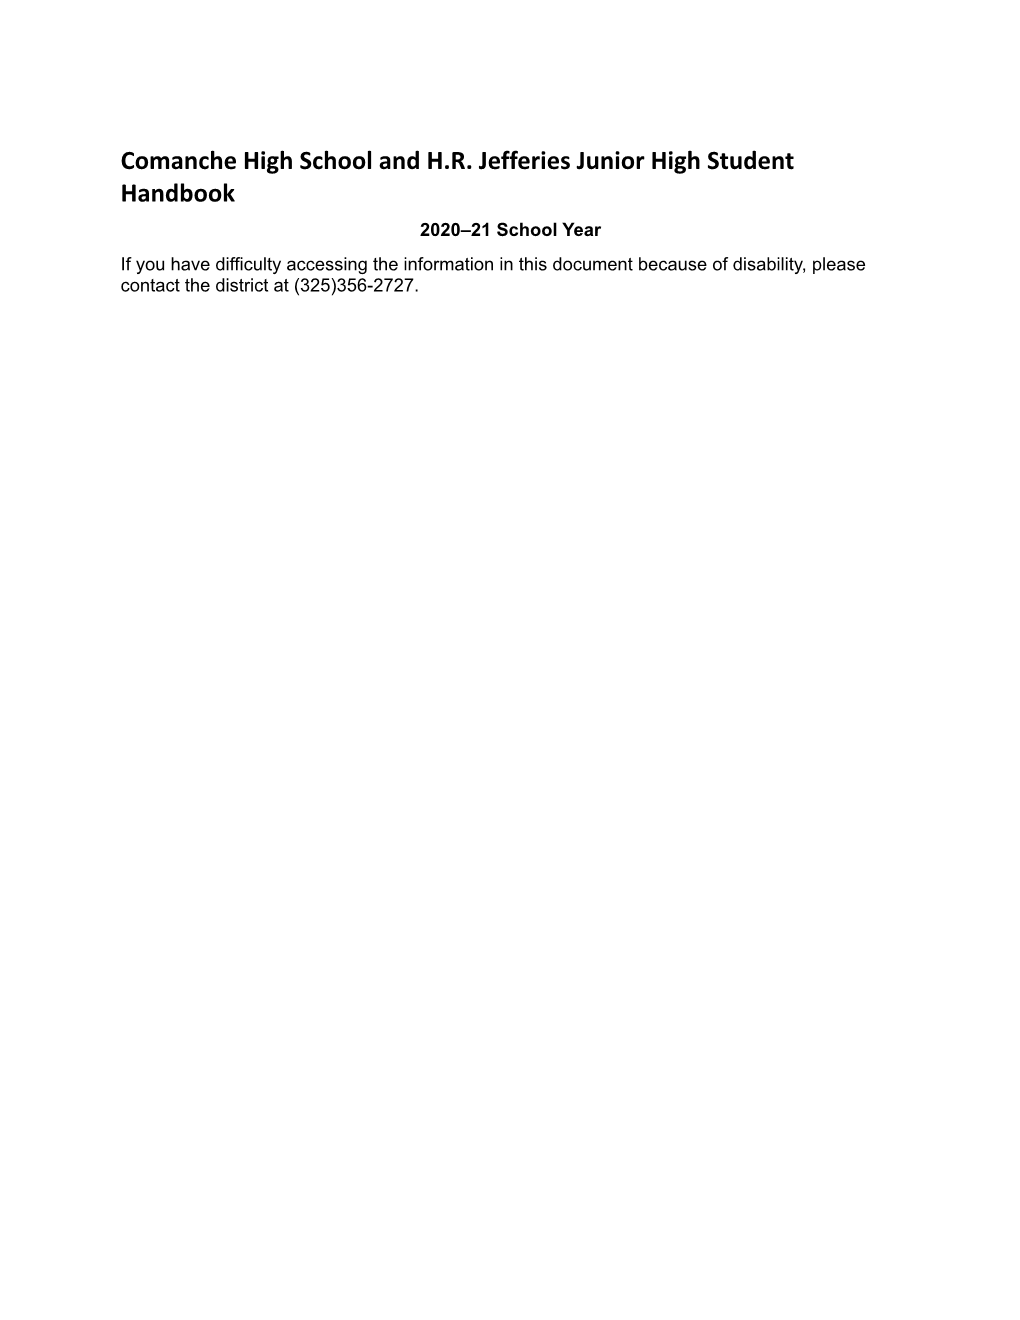 Comanche High School and H.R. Jefferies Junior High Student